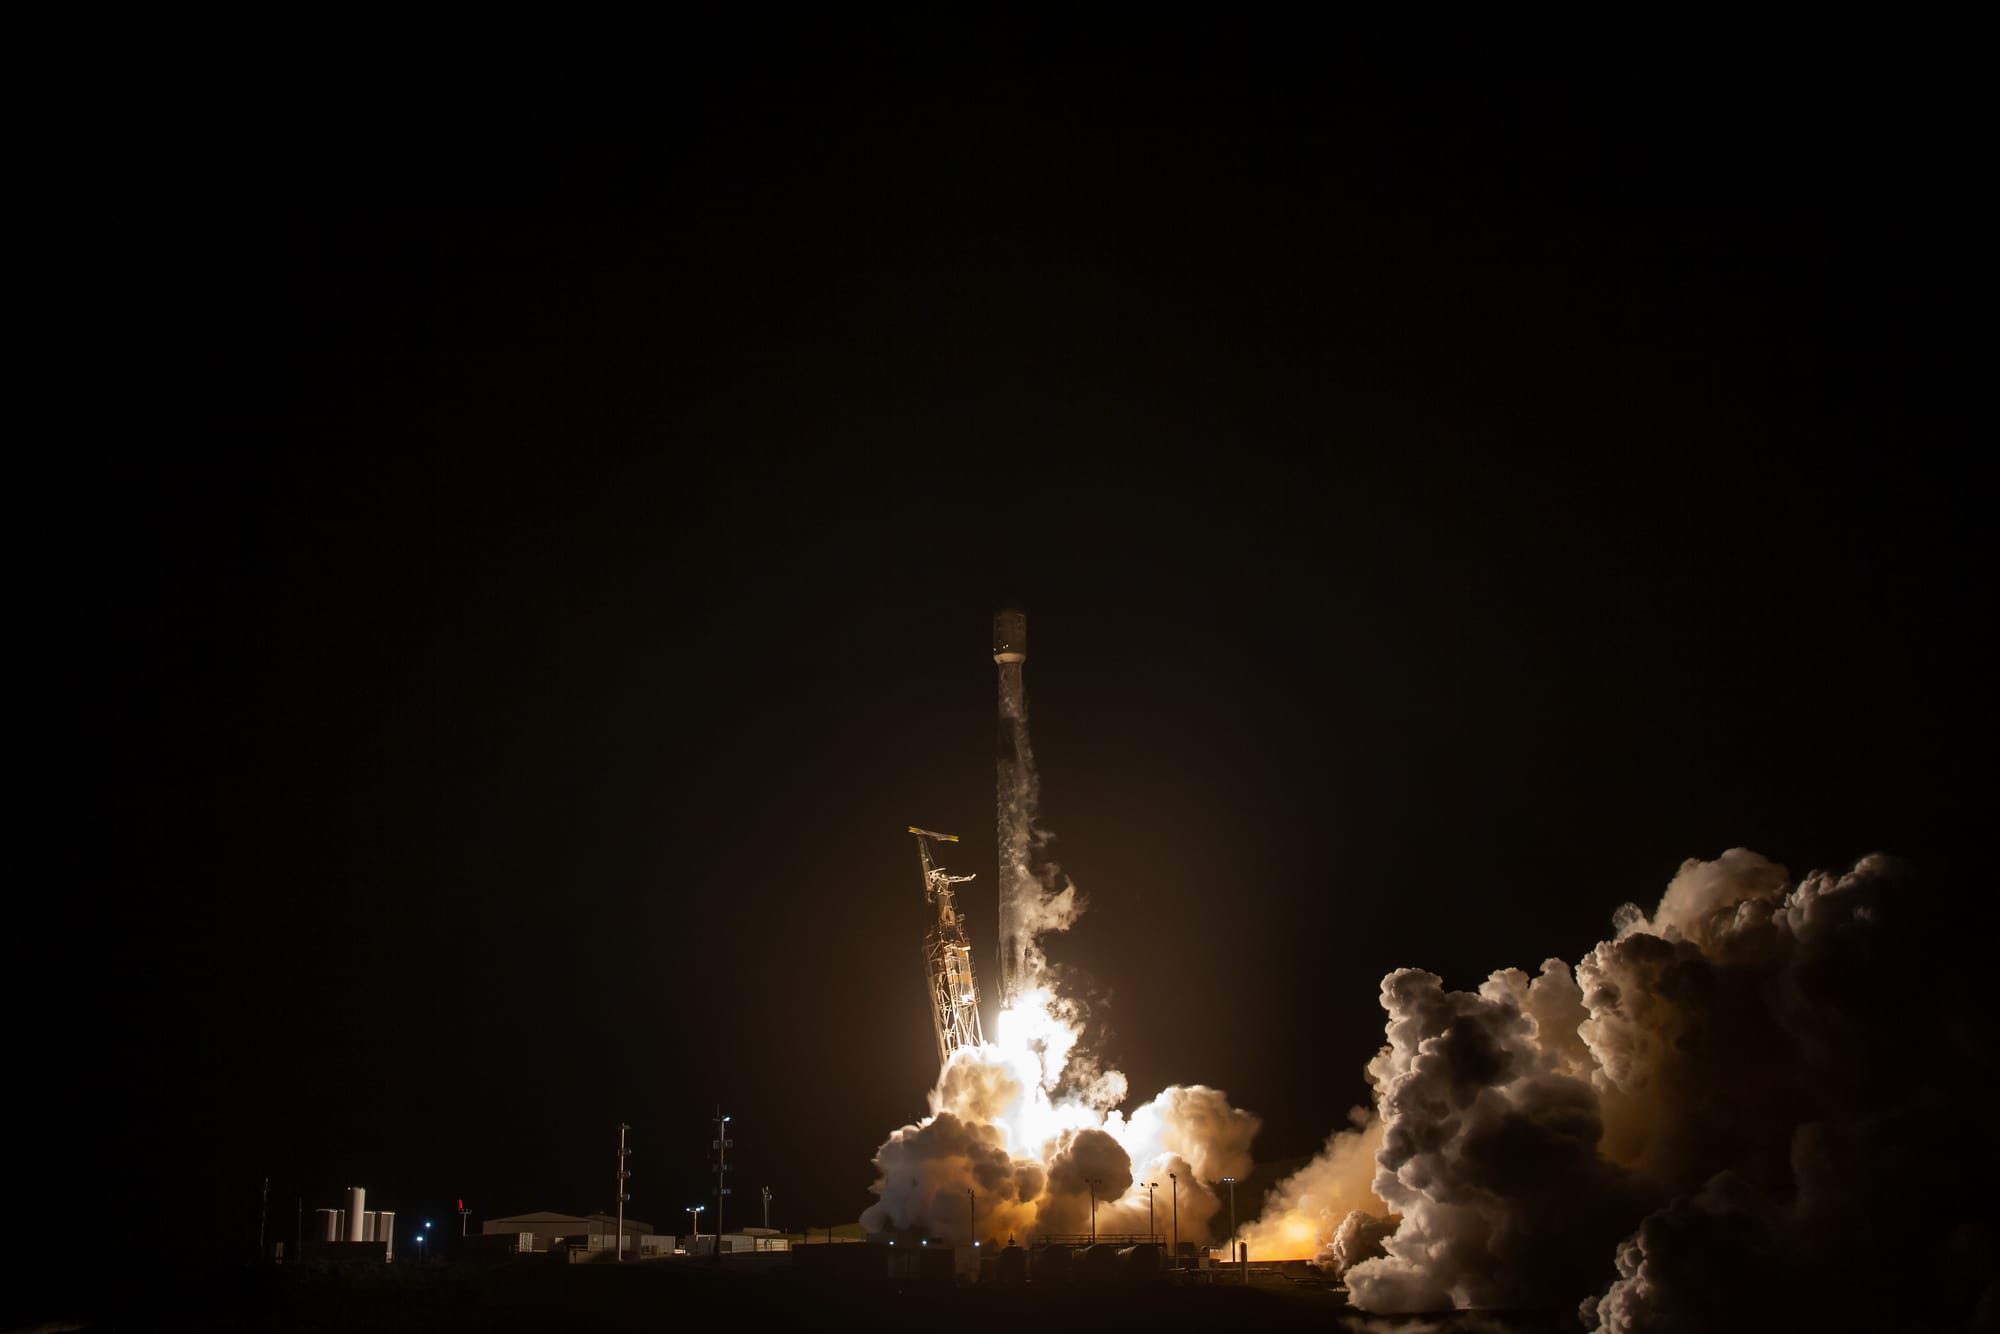 Falcon 9 lifting off from Space Launch Complex 4E. ©SpaceX